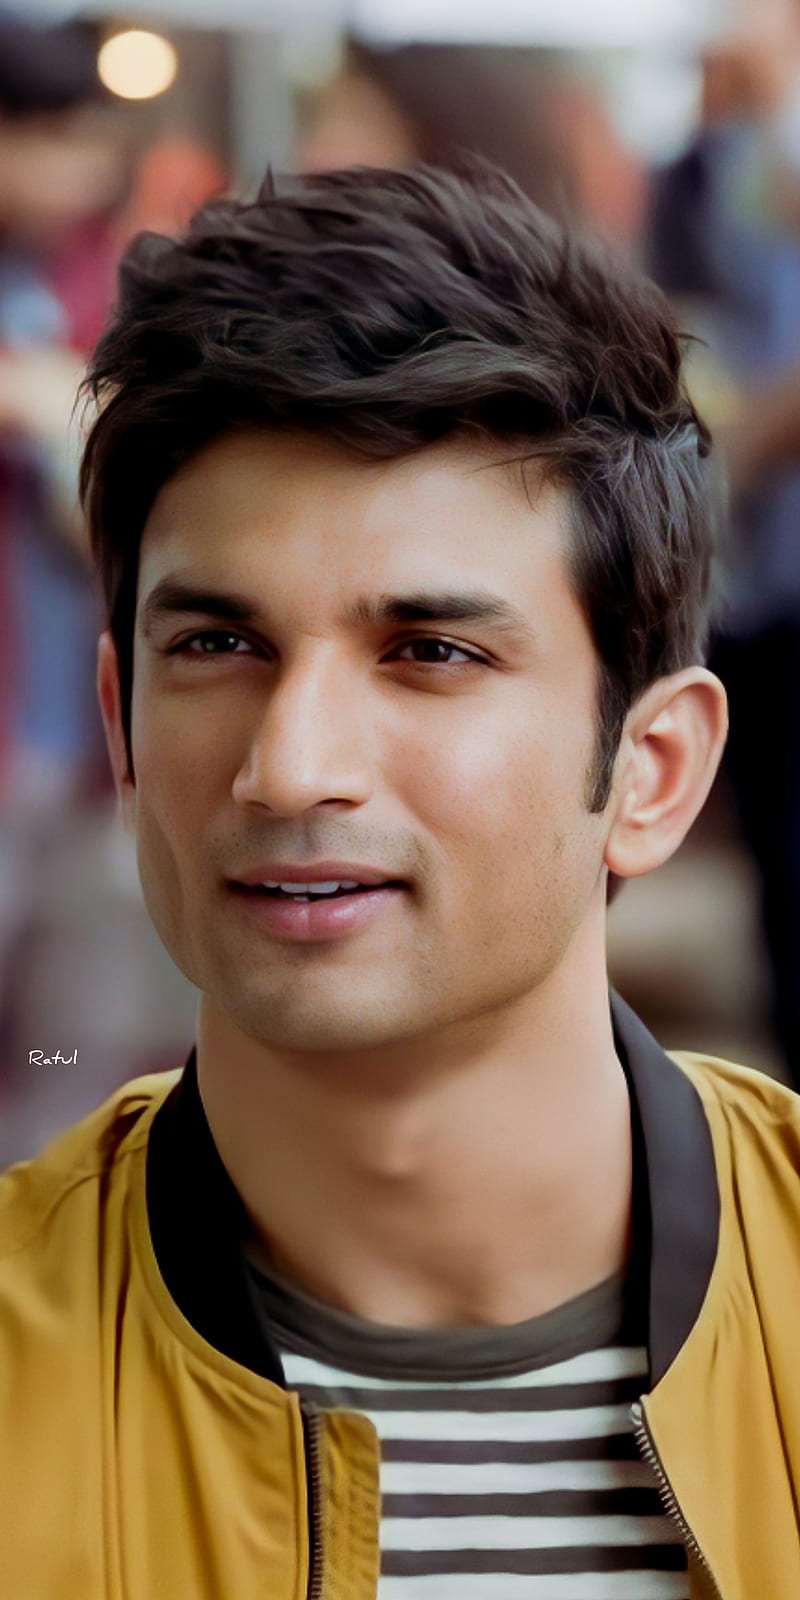 Over 999+ Stunning Sushant Singh Rajput HD Images in Full 4K Quality